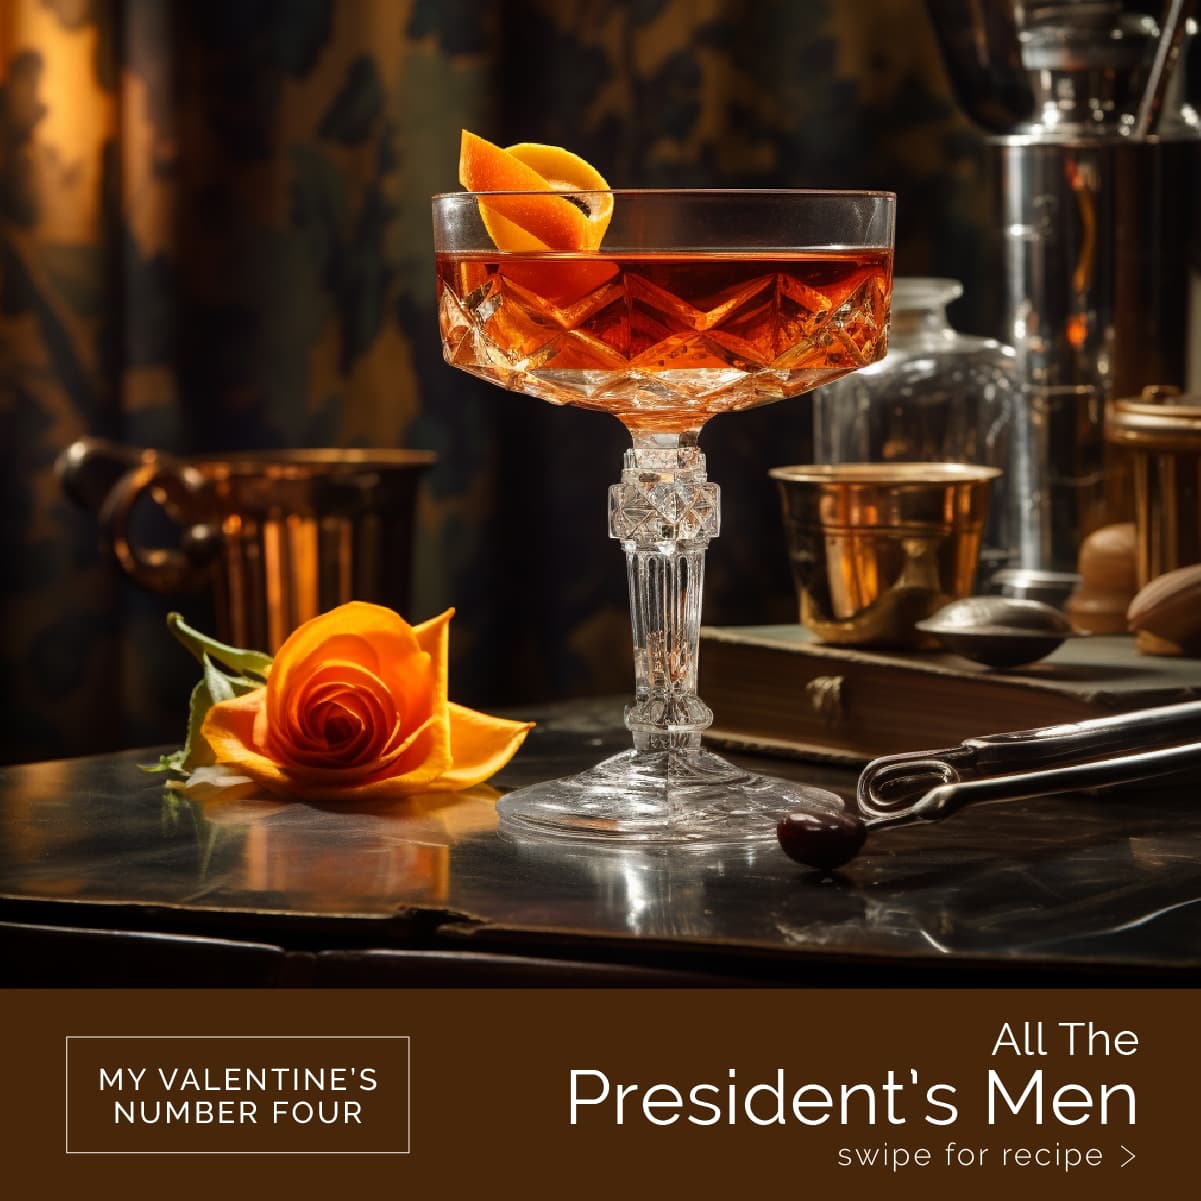 An All the President's Men cocktail